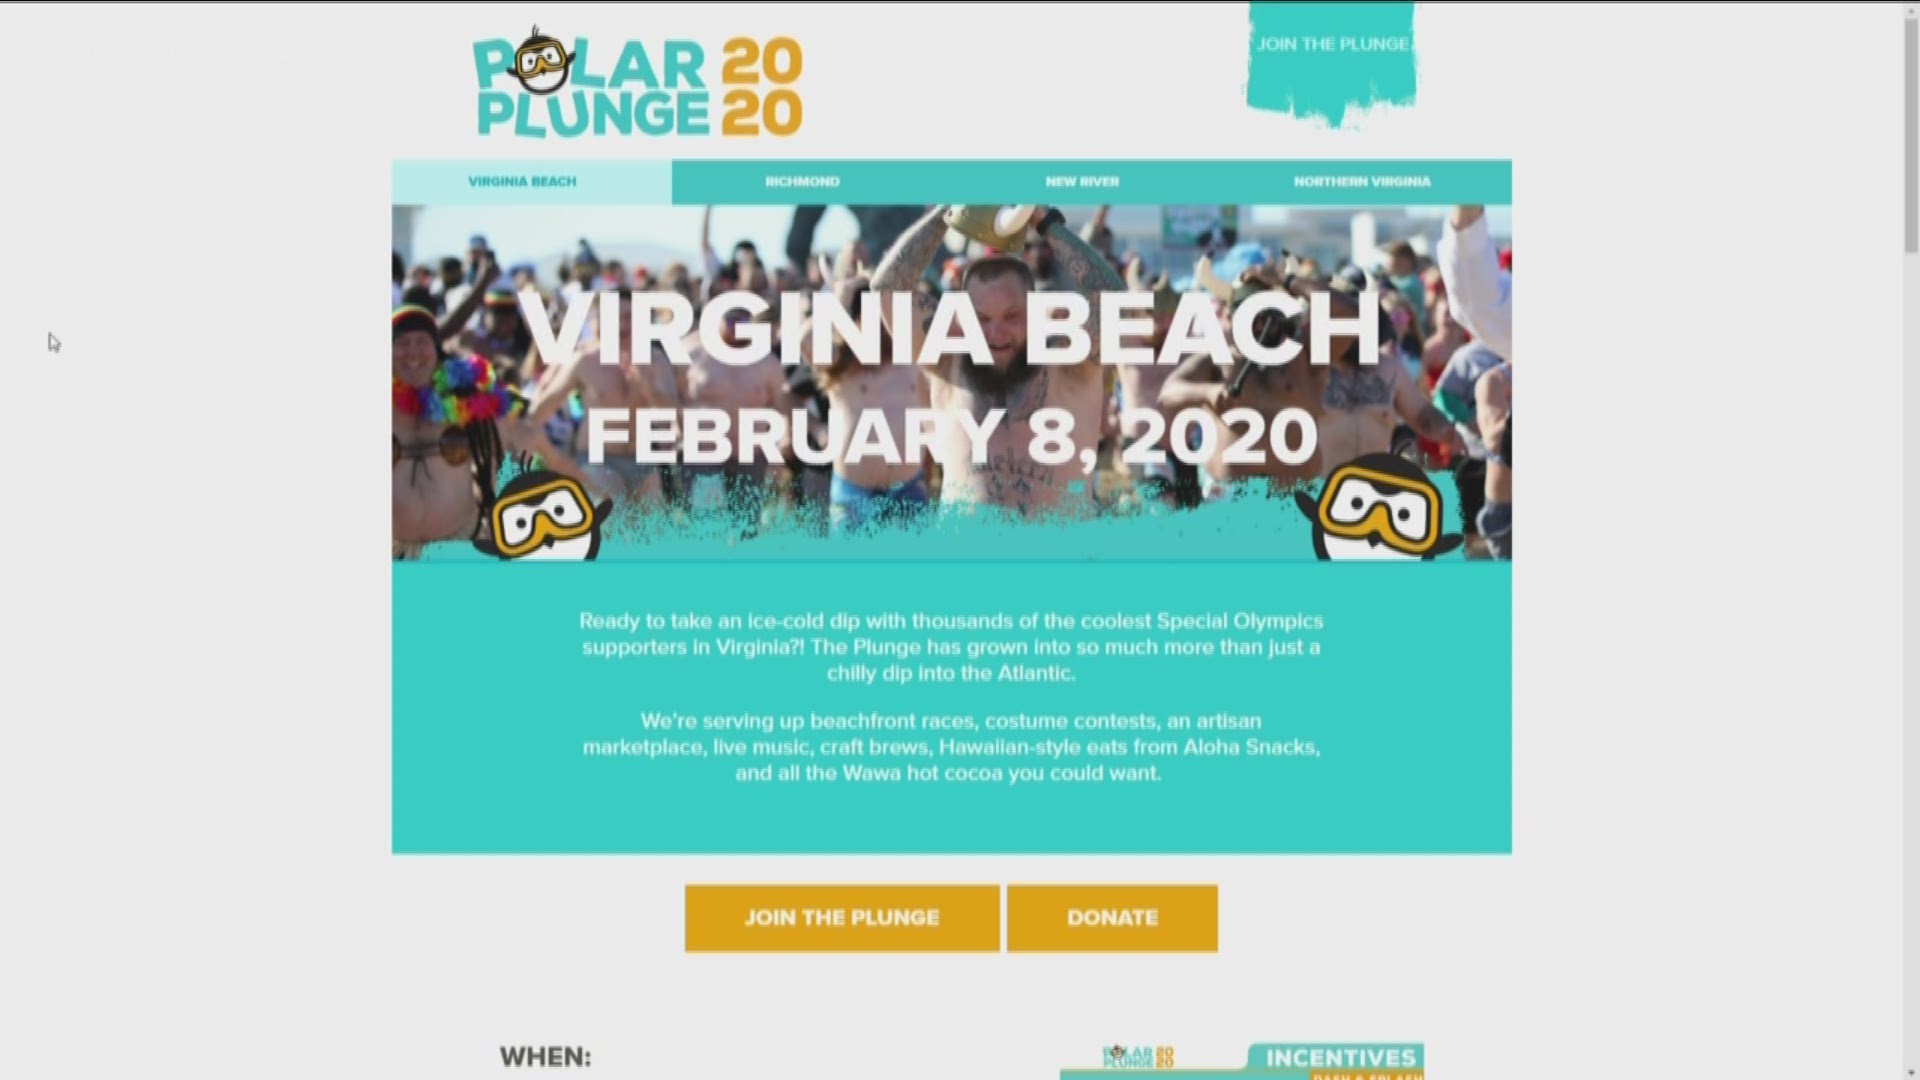 About 3,000 people will be freezing for a reason in Virginia Beach on Feb. 8. The Polar Plunge benefits the Virginia Special Olympics.